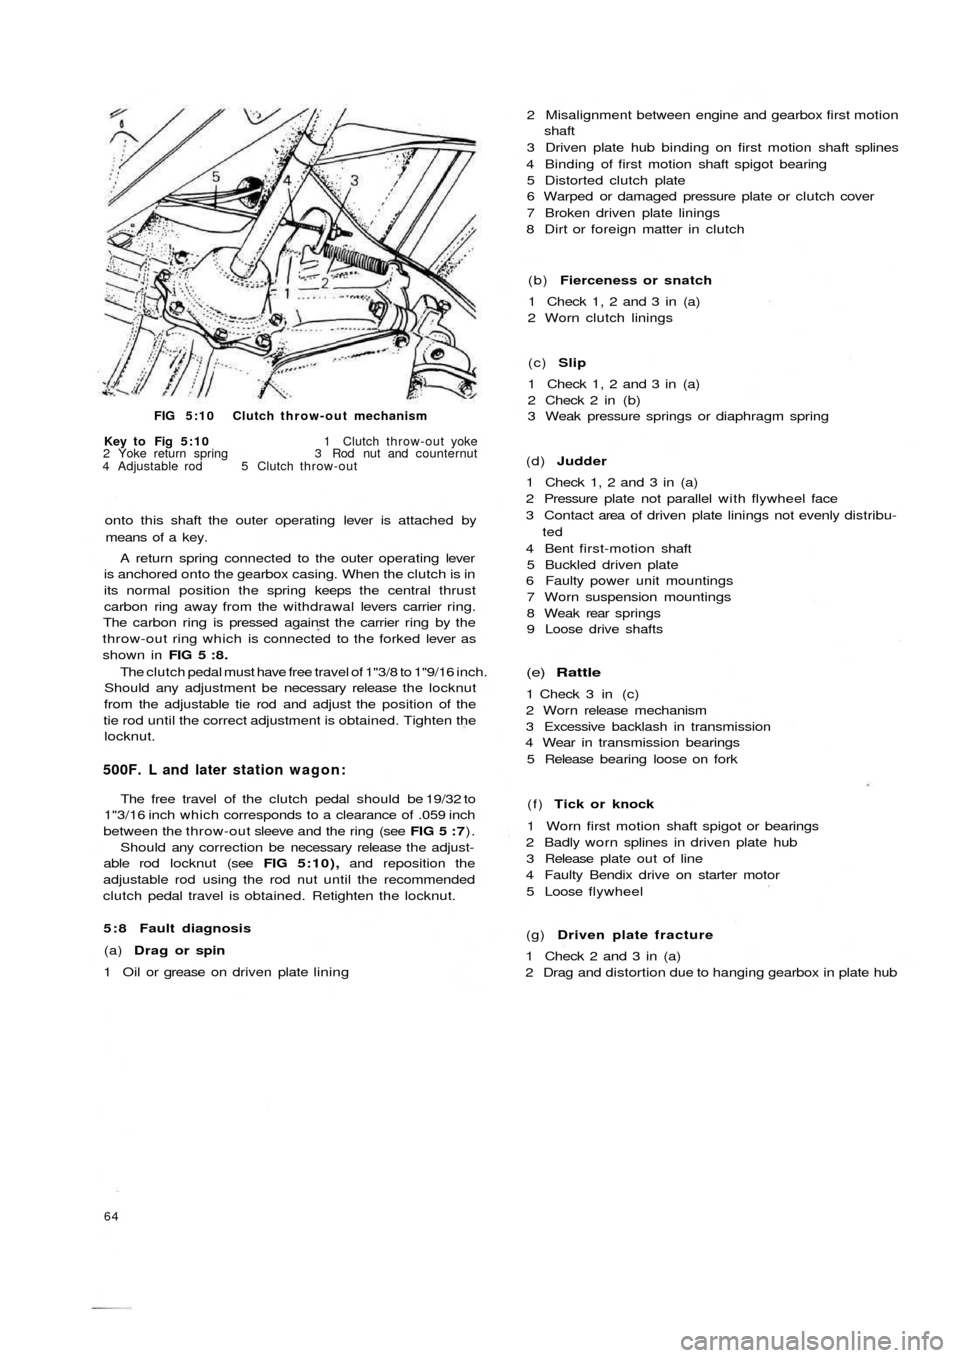 FIAT 500 1957 1.G Owners Manual FIG 5:10 Clutch throw-out mechanism
Key to  Fig  5:10 1 Clutch throw-out yoke
2 Yoke return spring 3 Rod nut and counternut
4 Adjustable rod  5  Clutch throw-out
onto this shaft the outer operating le